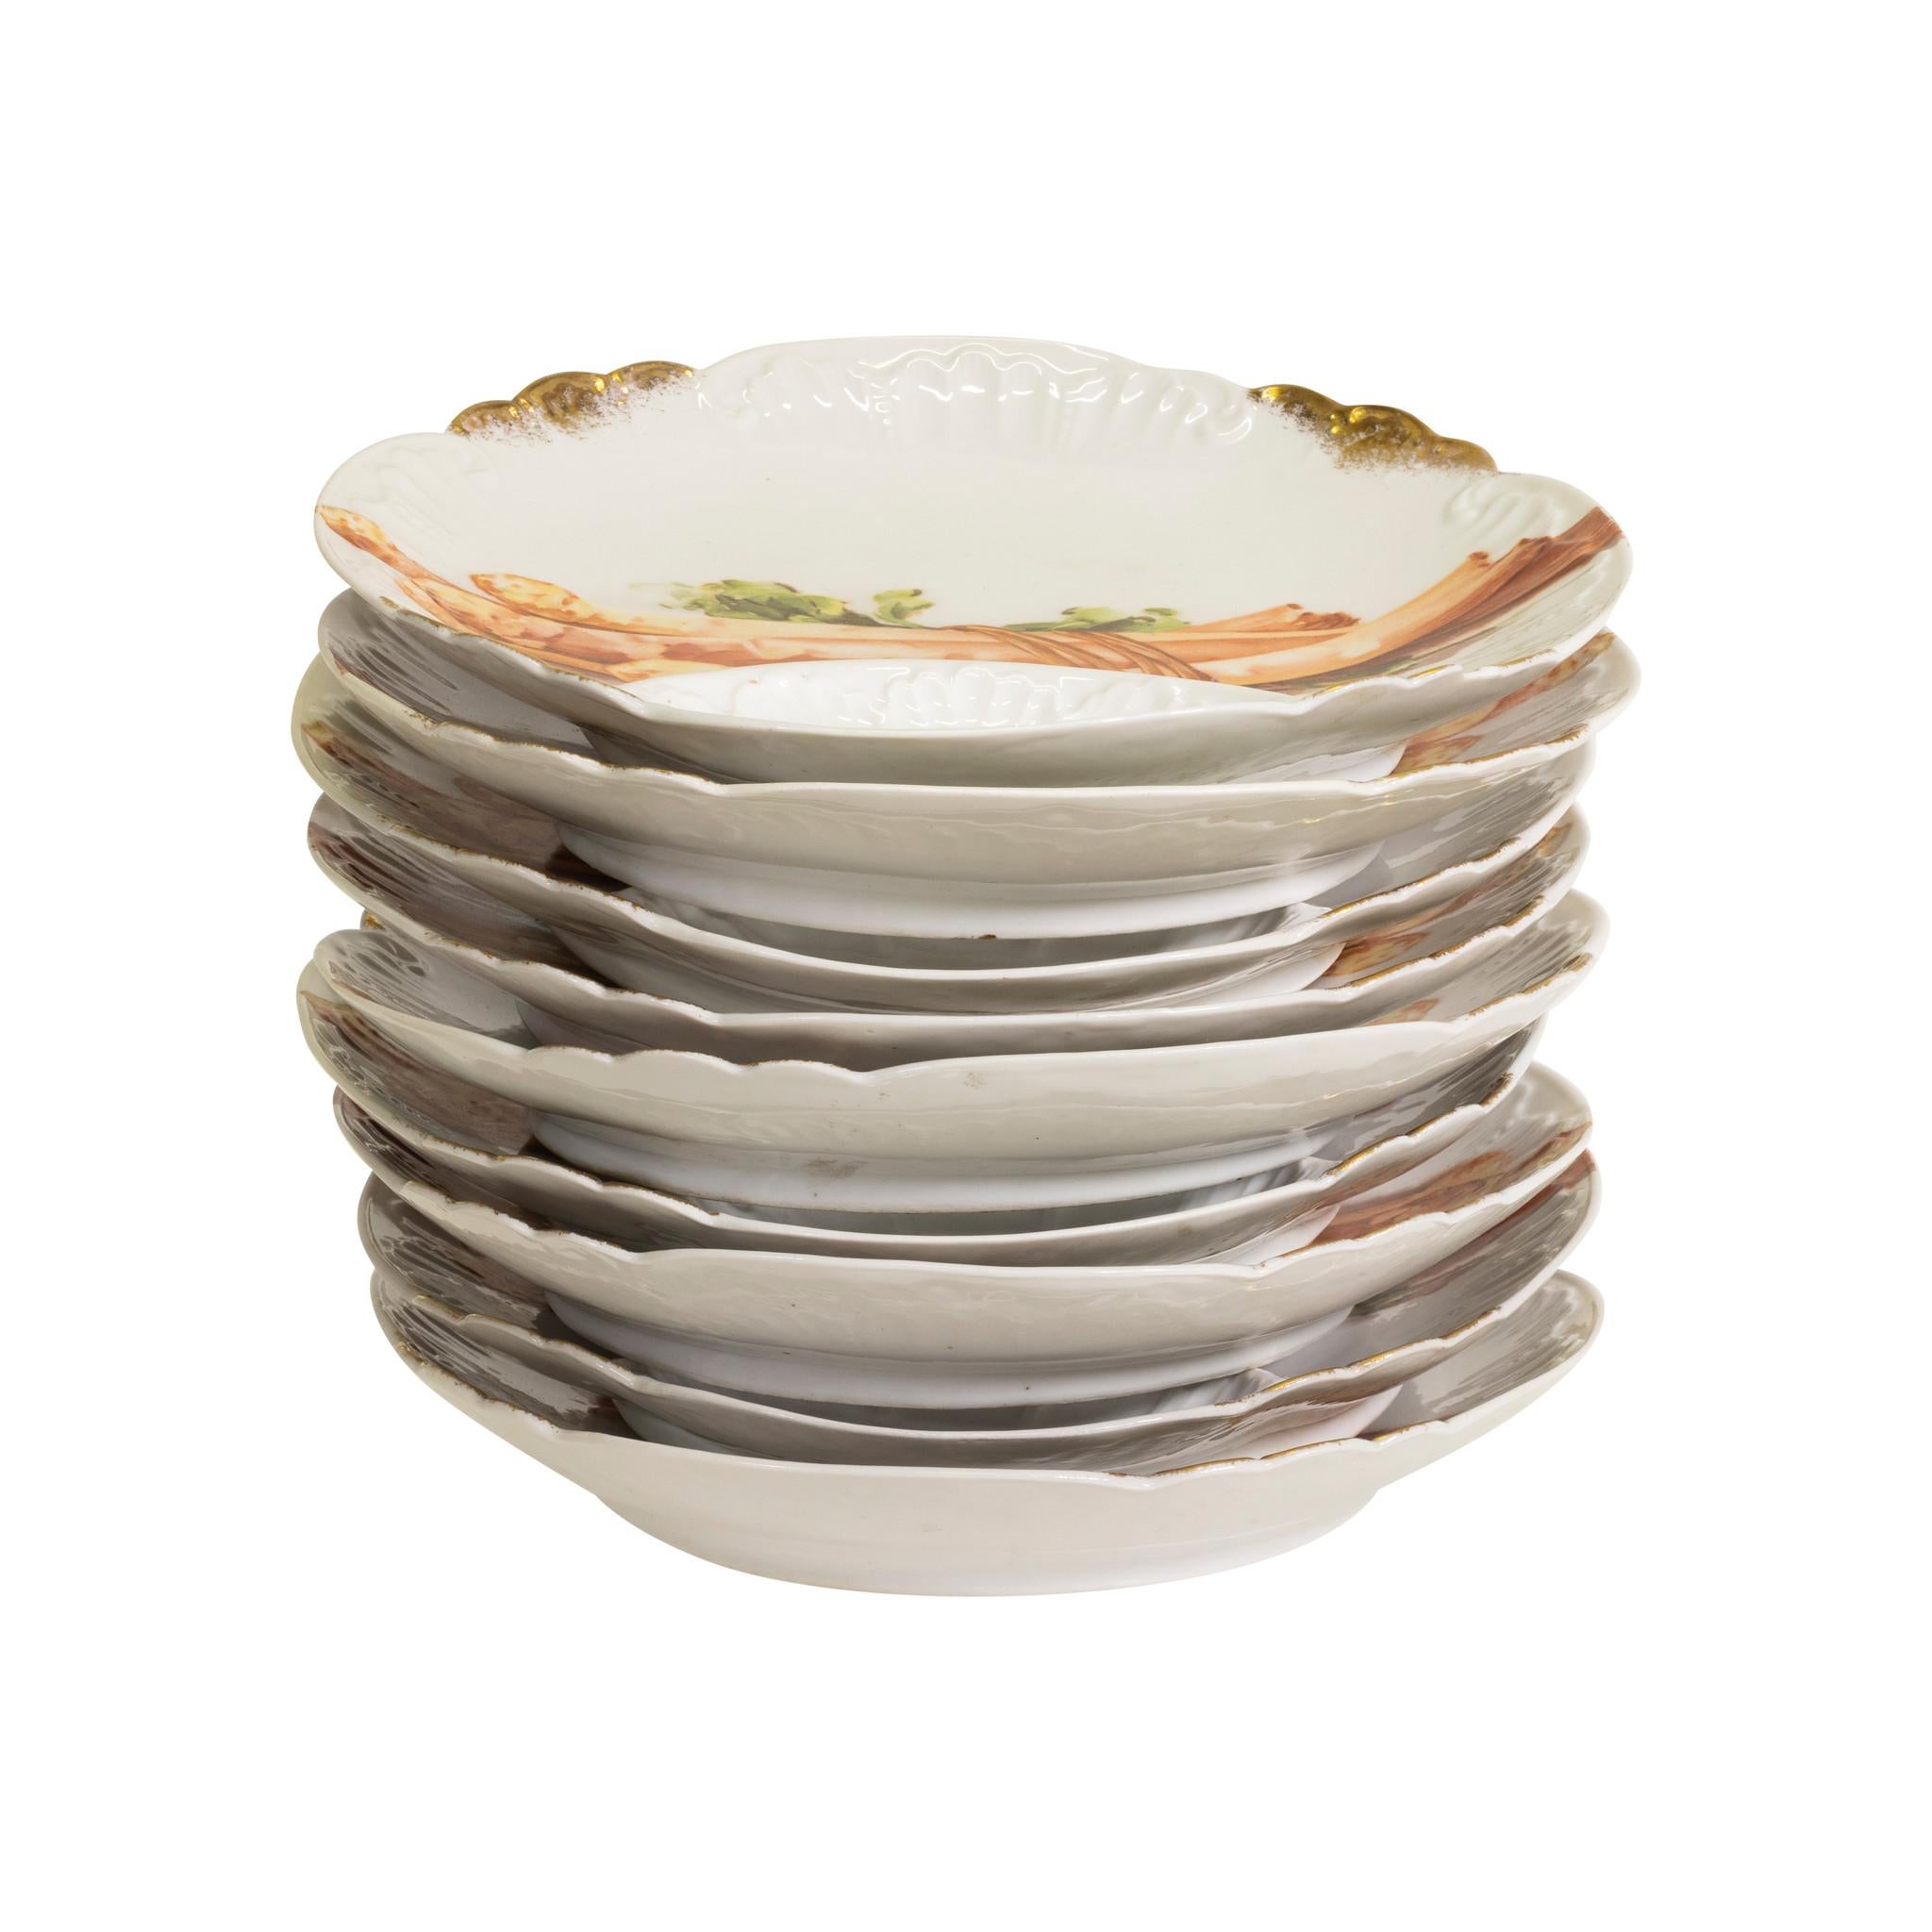 French Limoges Asparagus Service for Eight In Excellent Condition For Sale In Coeur d Alene, ID